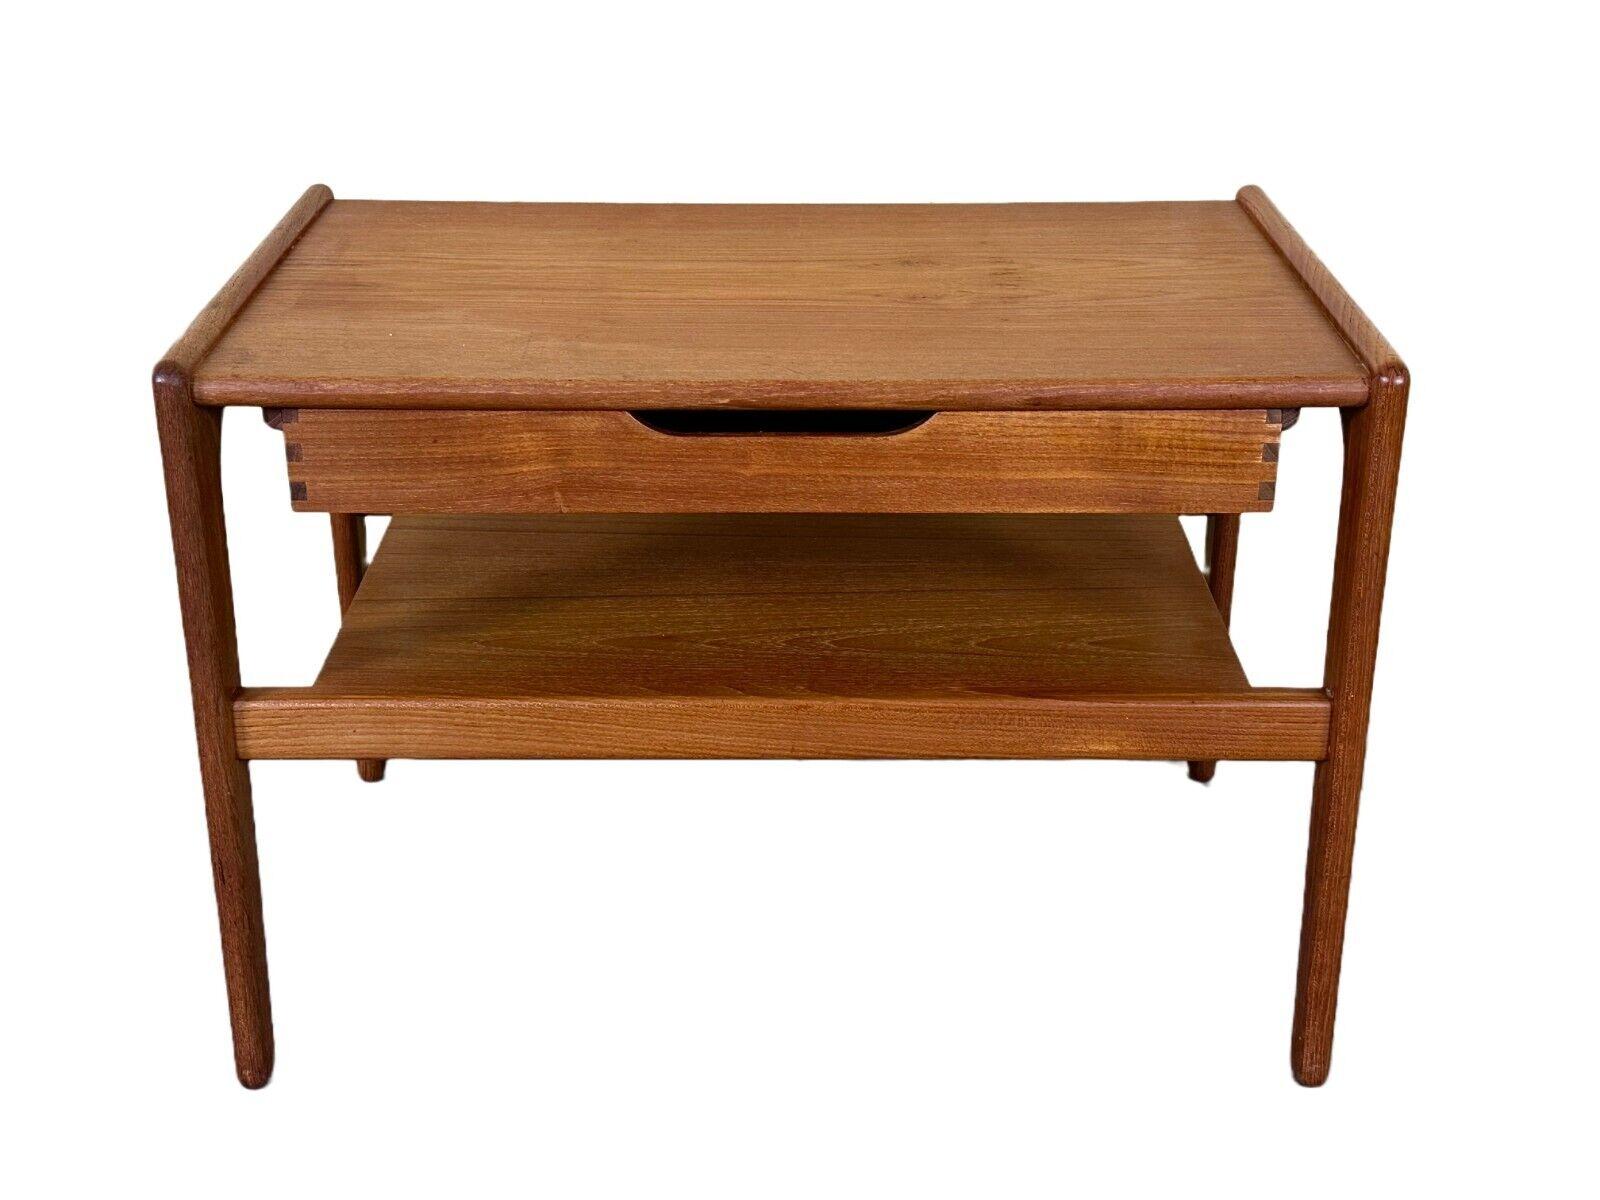 60s 70s teak side table with drawer Arne Wahl Iversen Denmark

Object: side table

Manufacturer:

Condition: good - vintage

Age: around 1960-1970

Dimensions:

Width = 70cm
Depth = 44.5cm
Height = 48cm

Other notes:

The pictures serve as part of